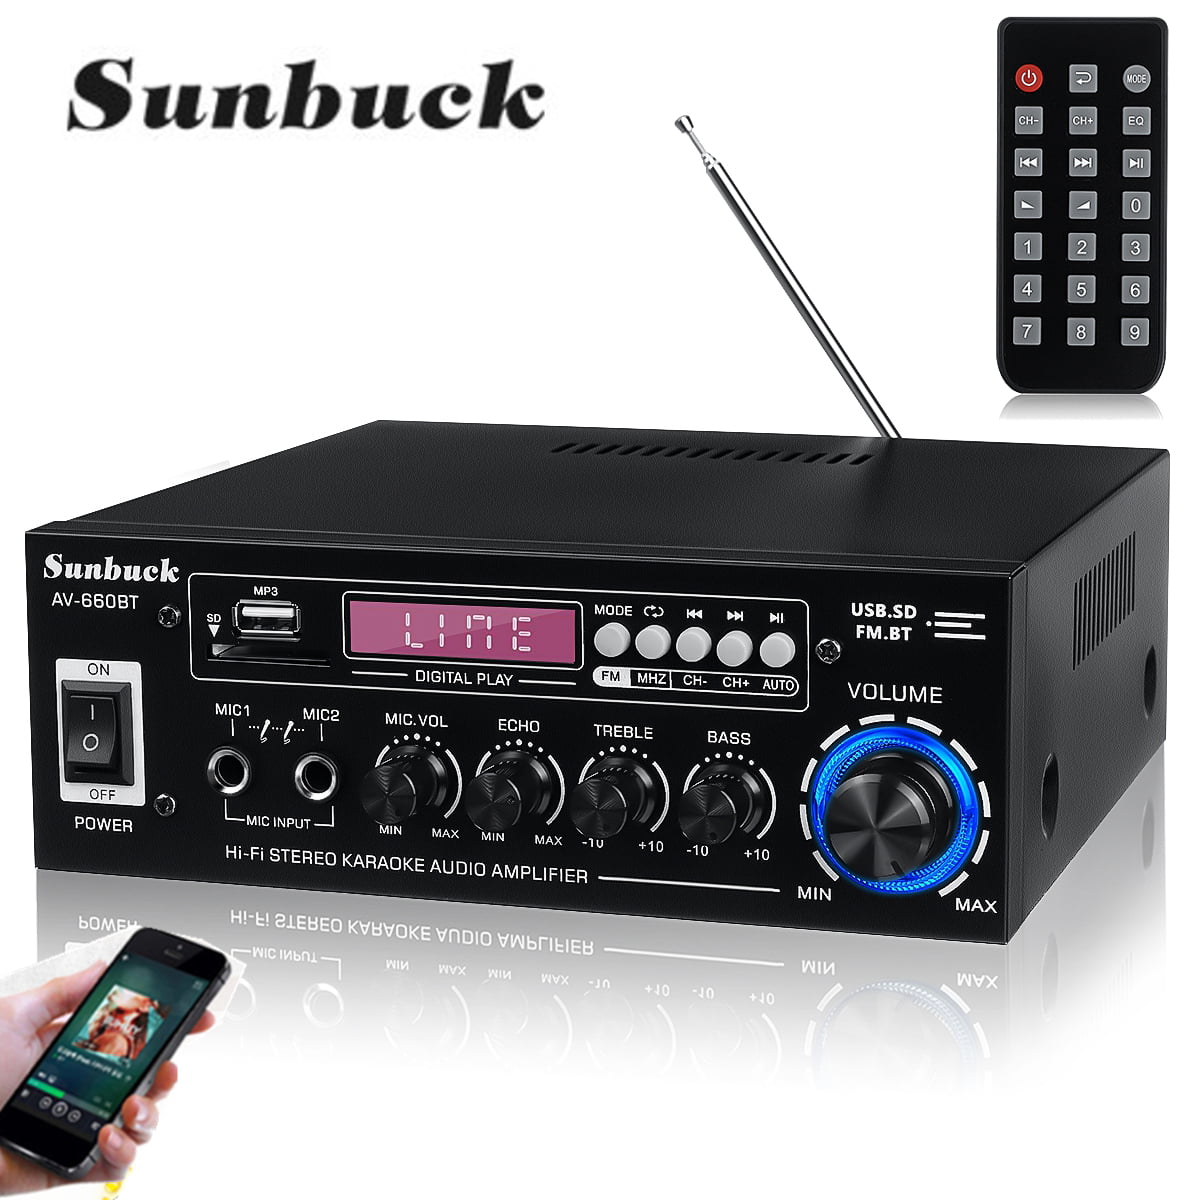 110V Power Home Stereo Amplifier Receiver, Audio Amplifier Speacker Radio Mic Input USB High Power For Car Home Use Support USB Disk/Max 64GB SD Card (Not included